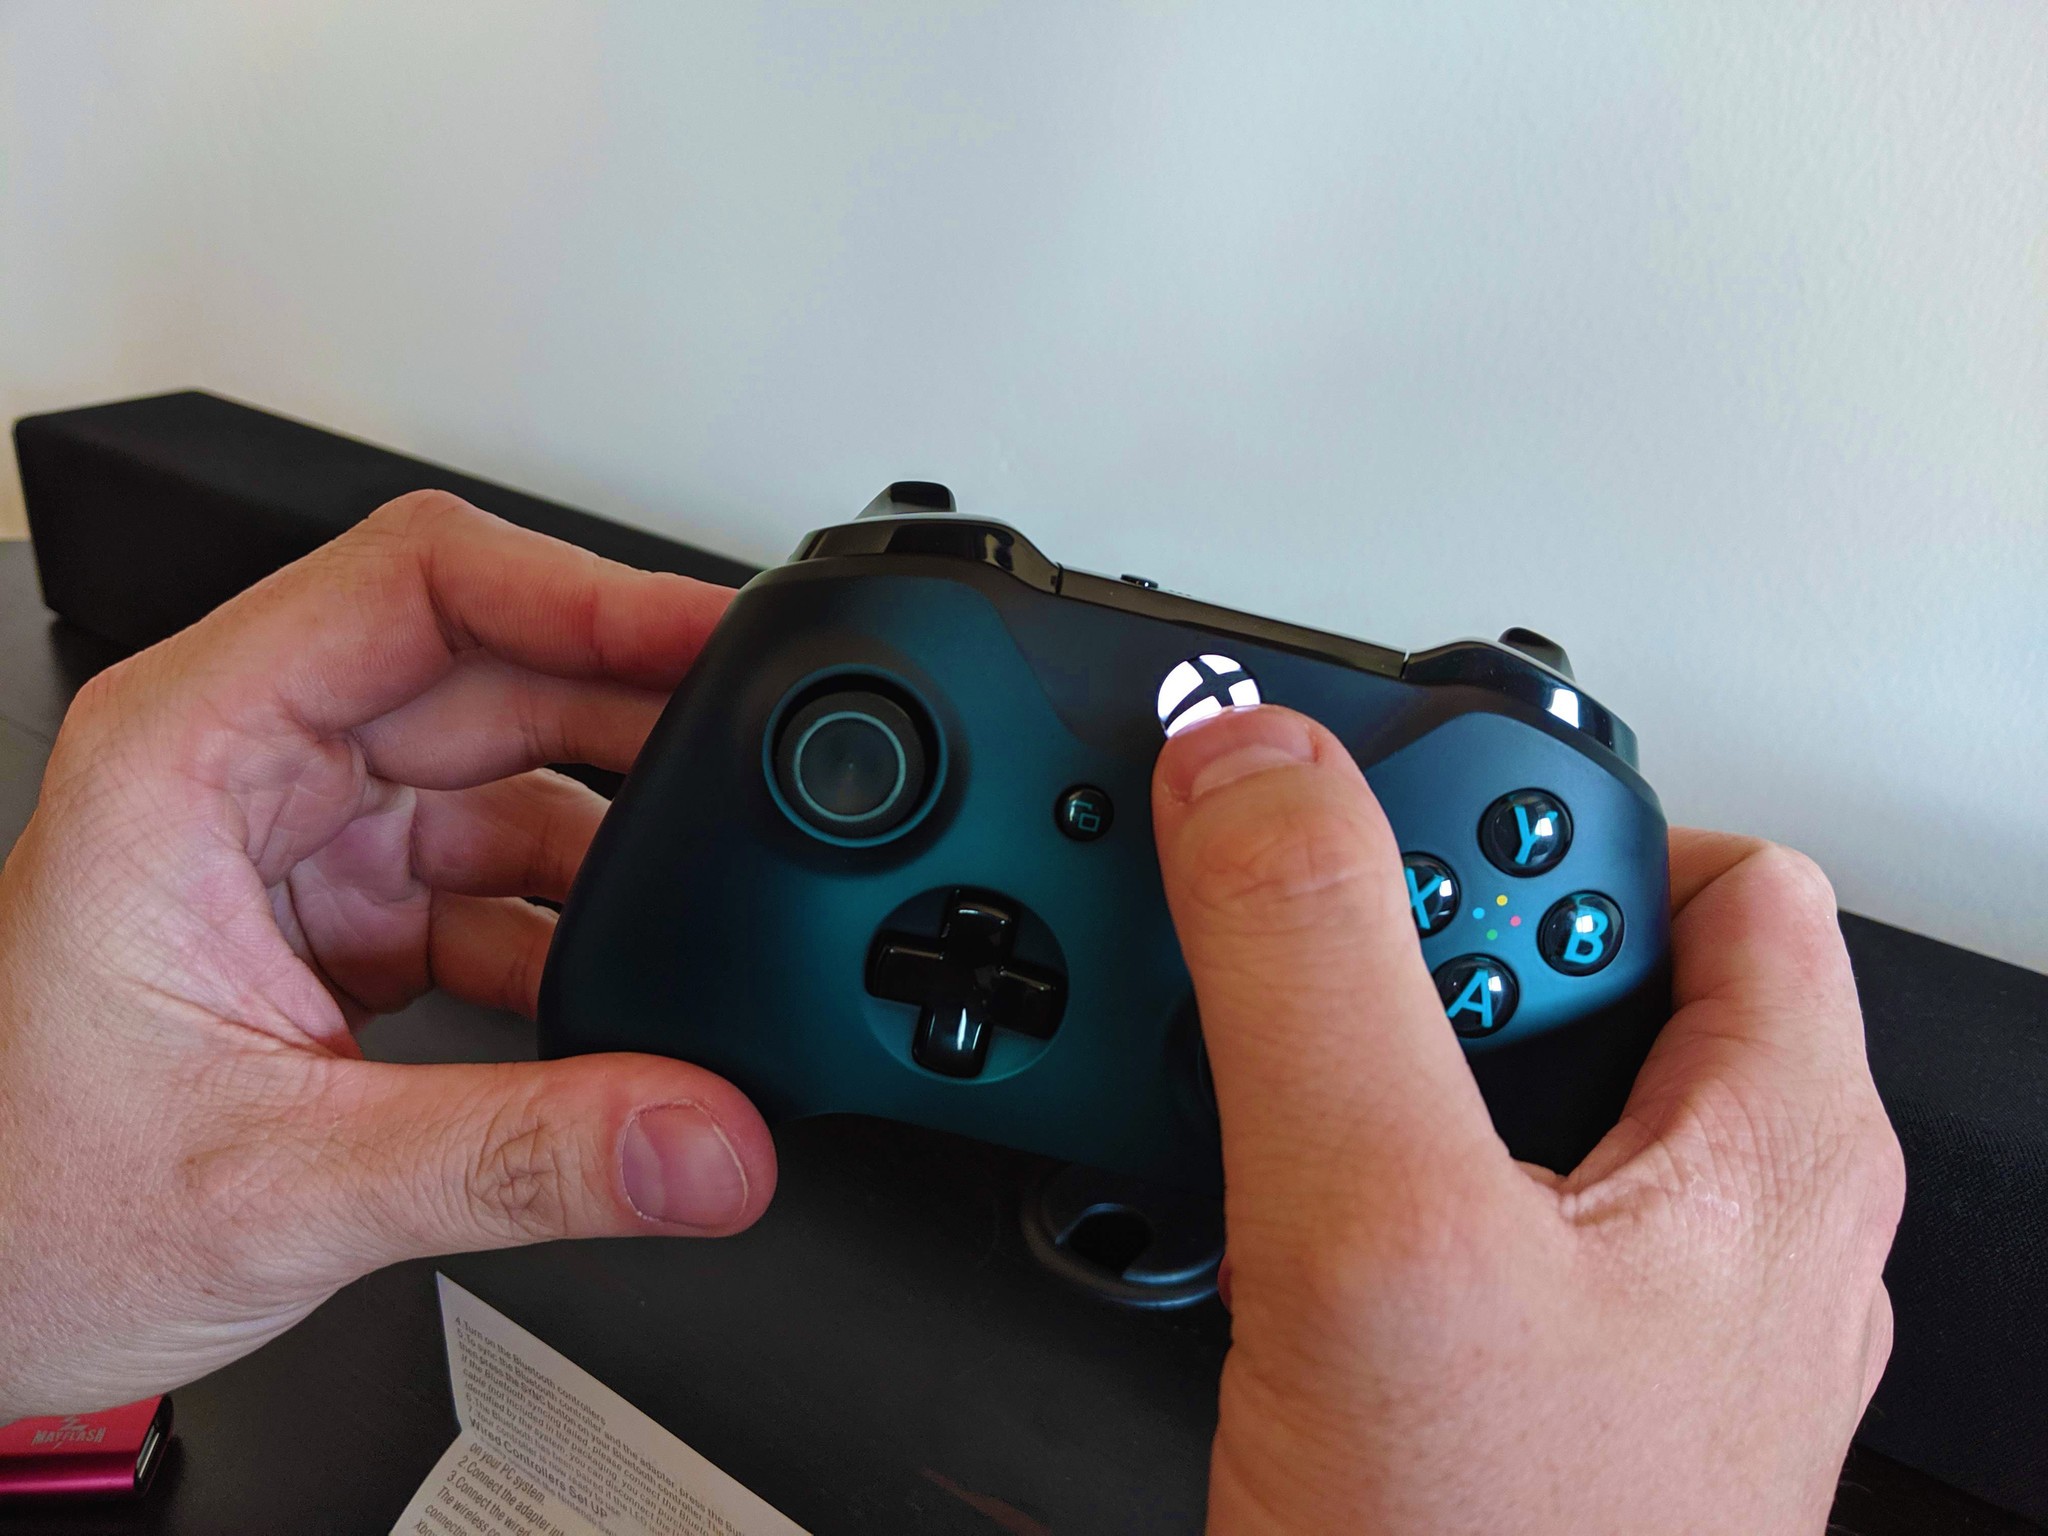 How to connect your Xbox One controller with the Nintendo Switch in wireless tabletop mode step five: With the LED flashing rapidly, grab your Xbox One controller and press the Xbox home button to wake it